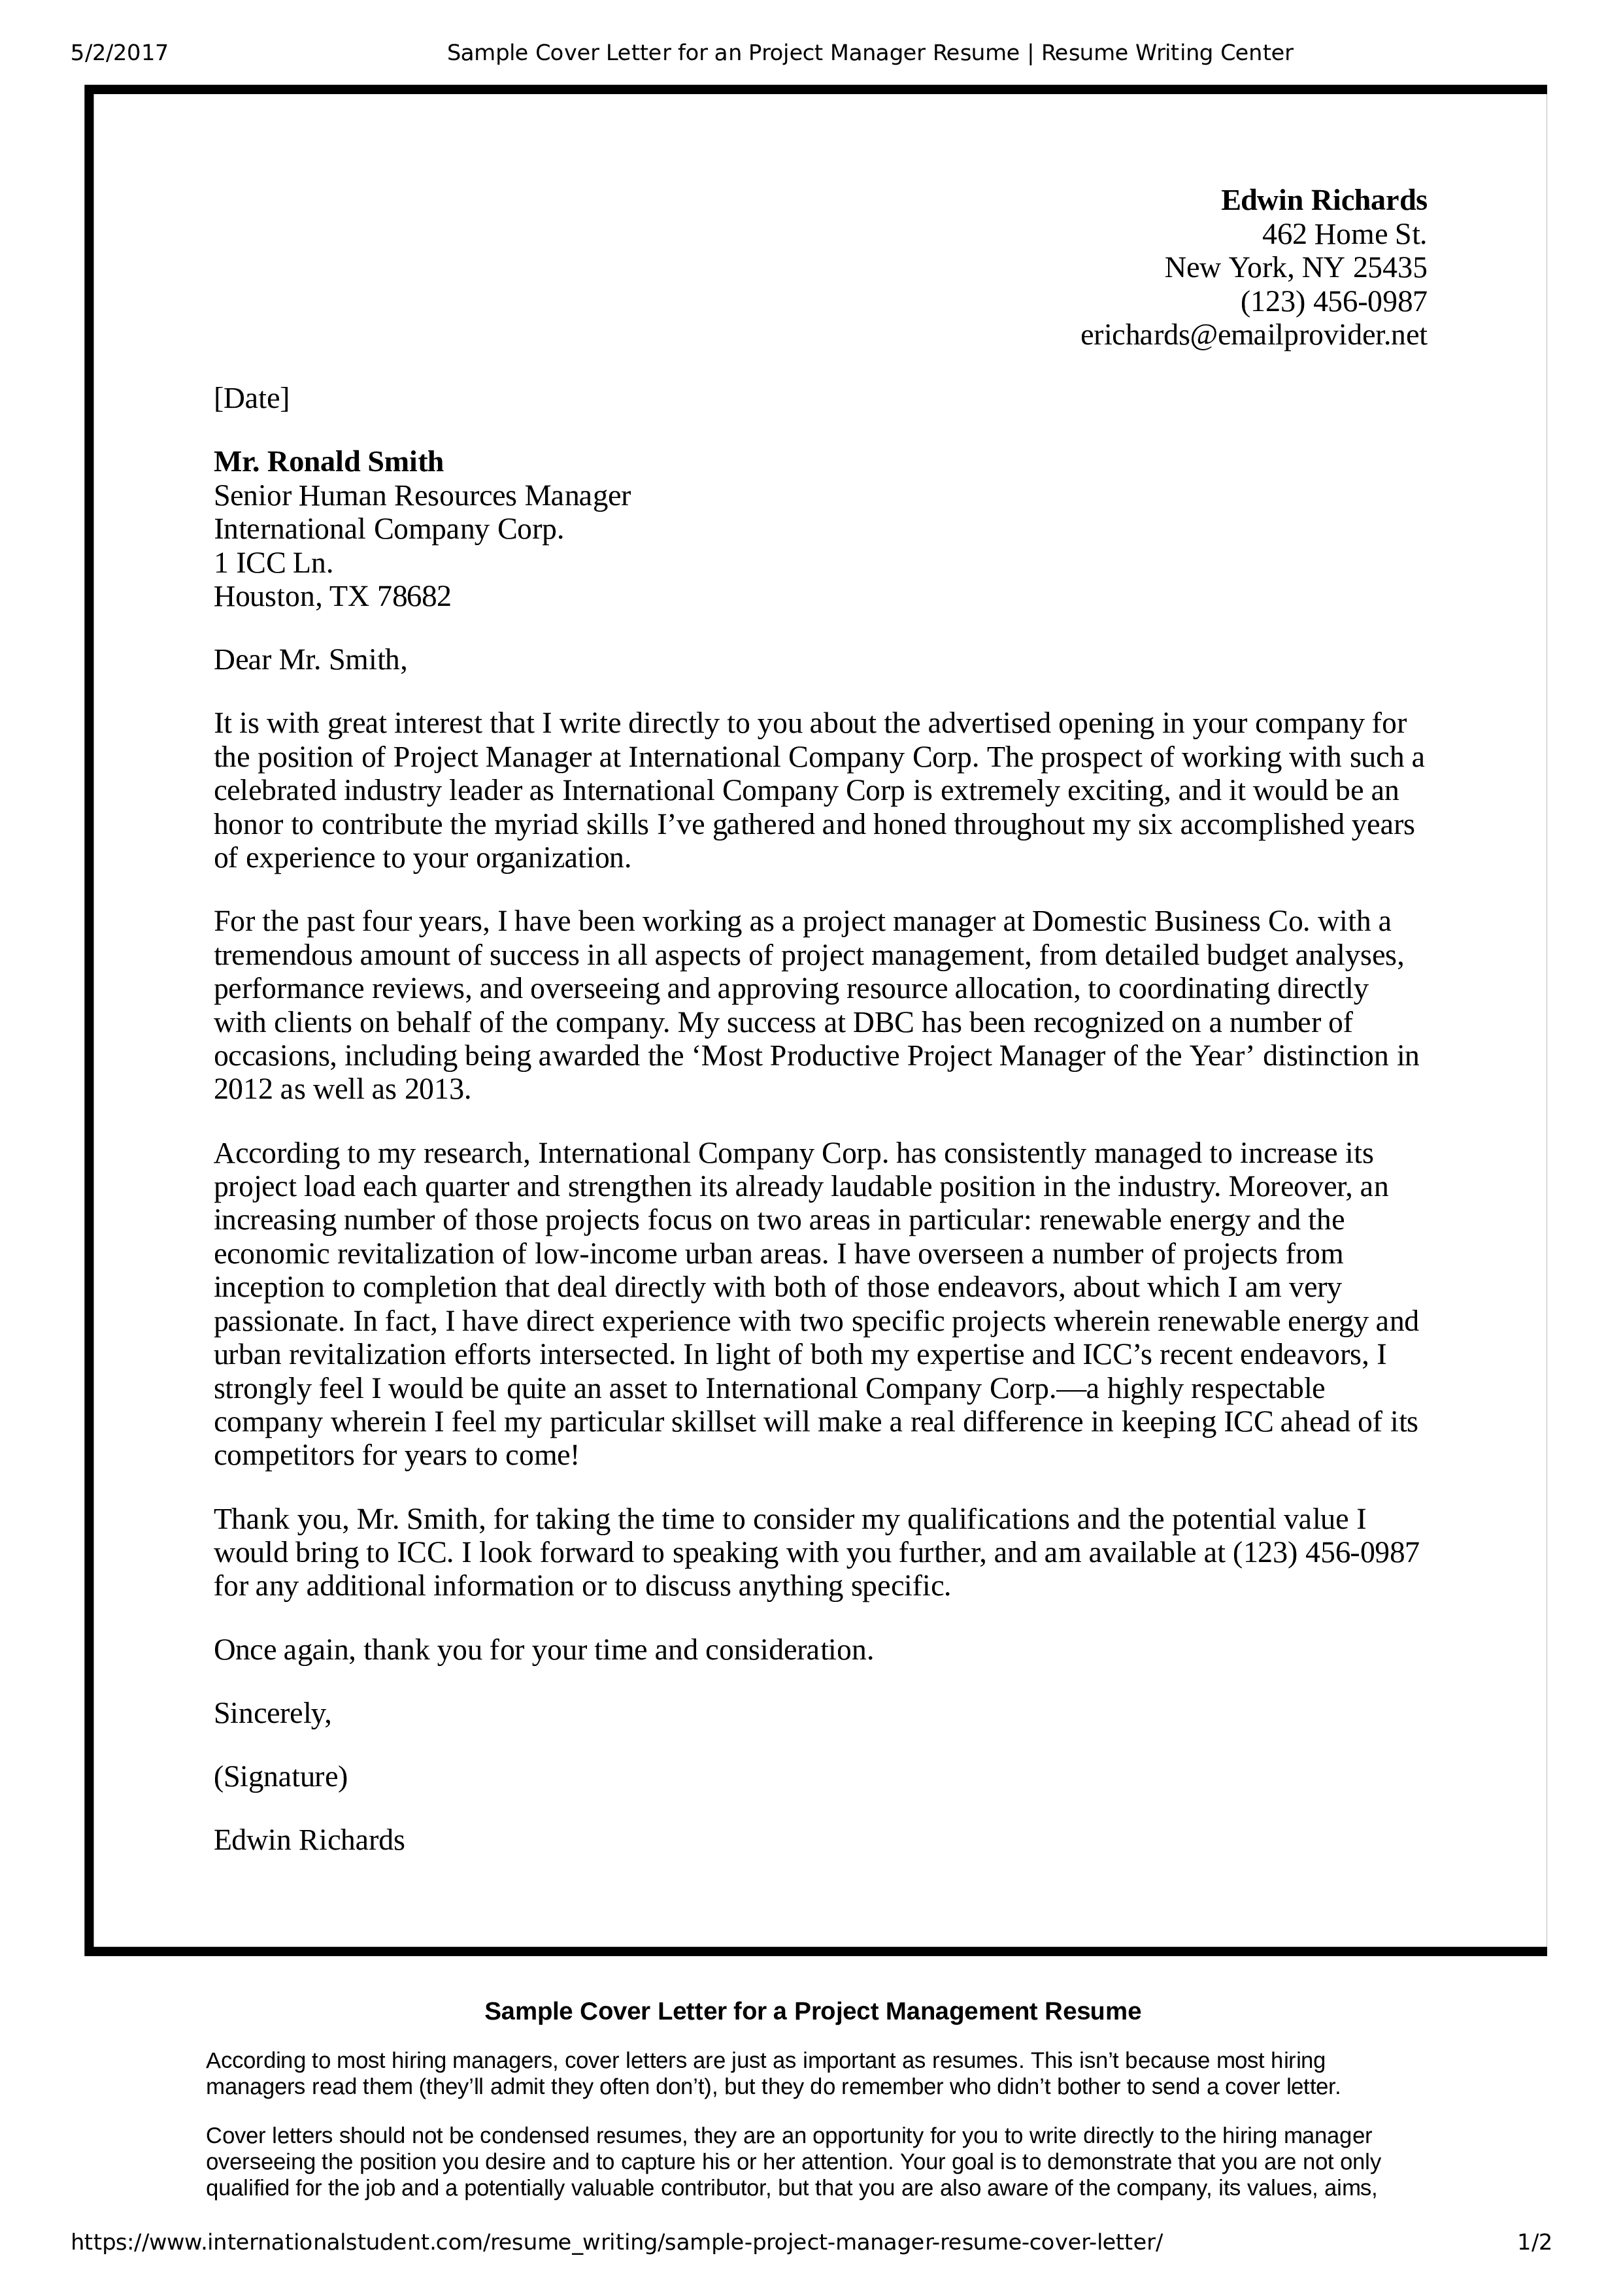 application letter it manager